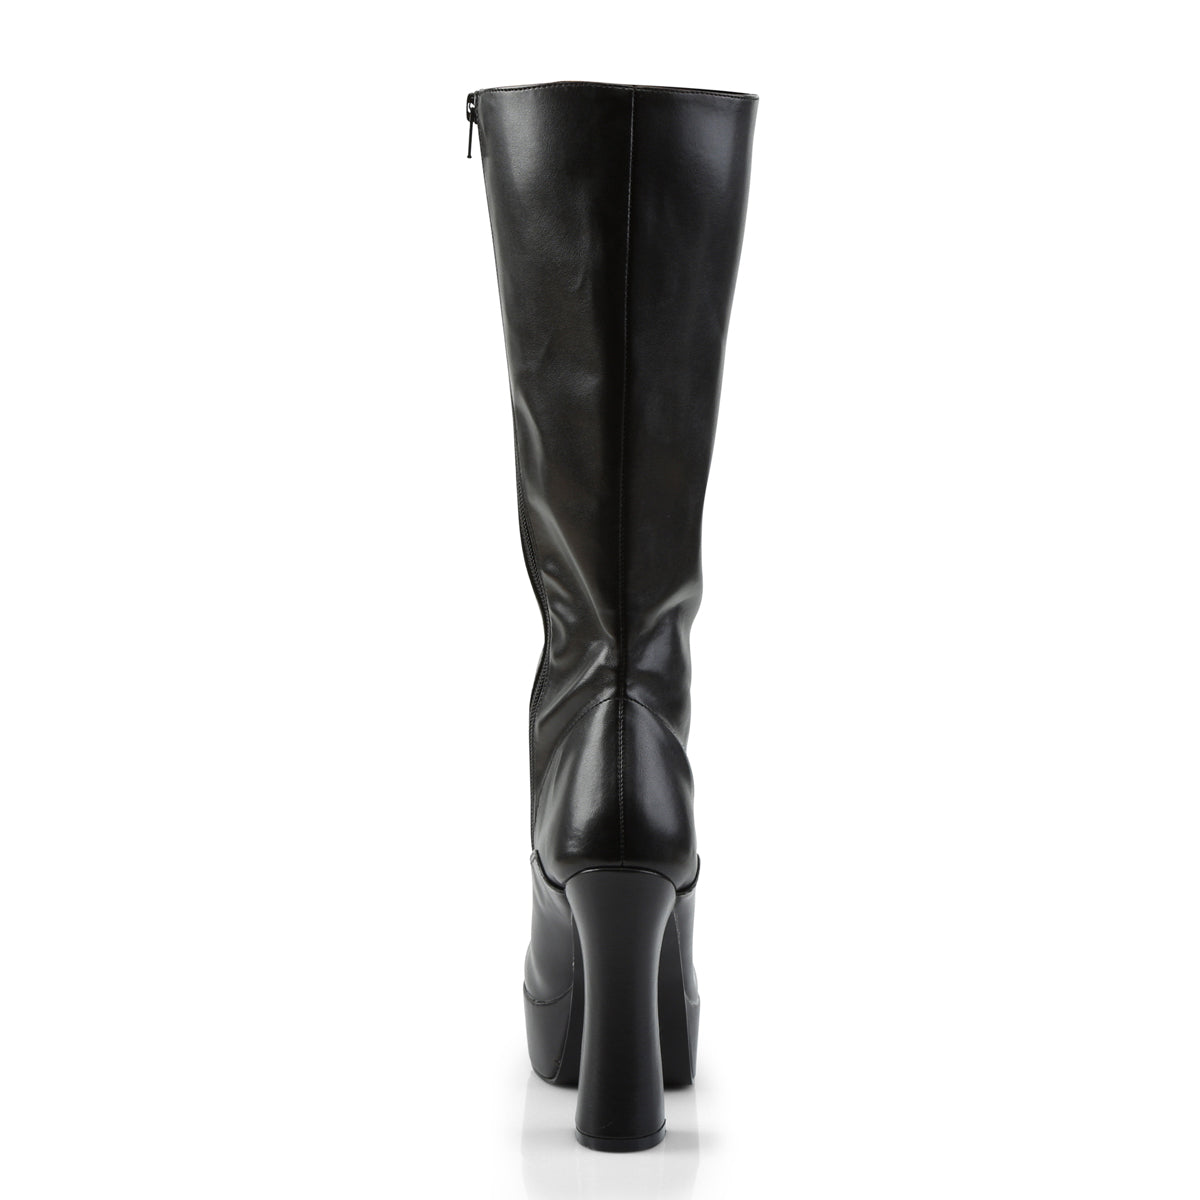 5" Electra Lace Up Knee Boot in matte black, rear view.